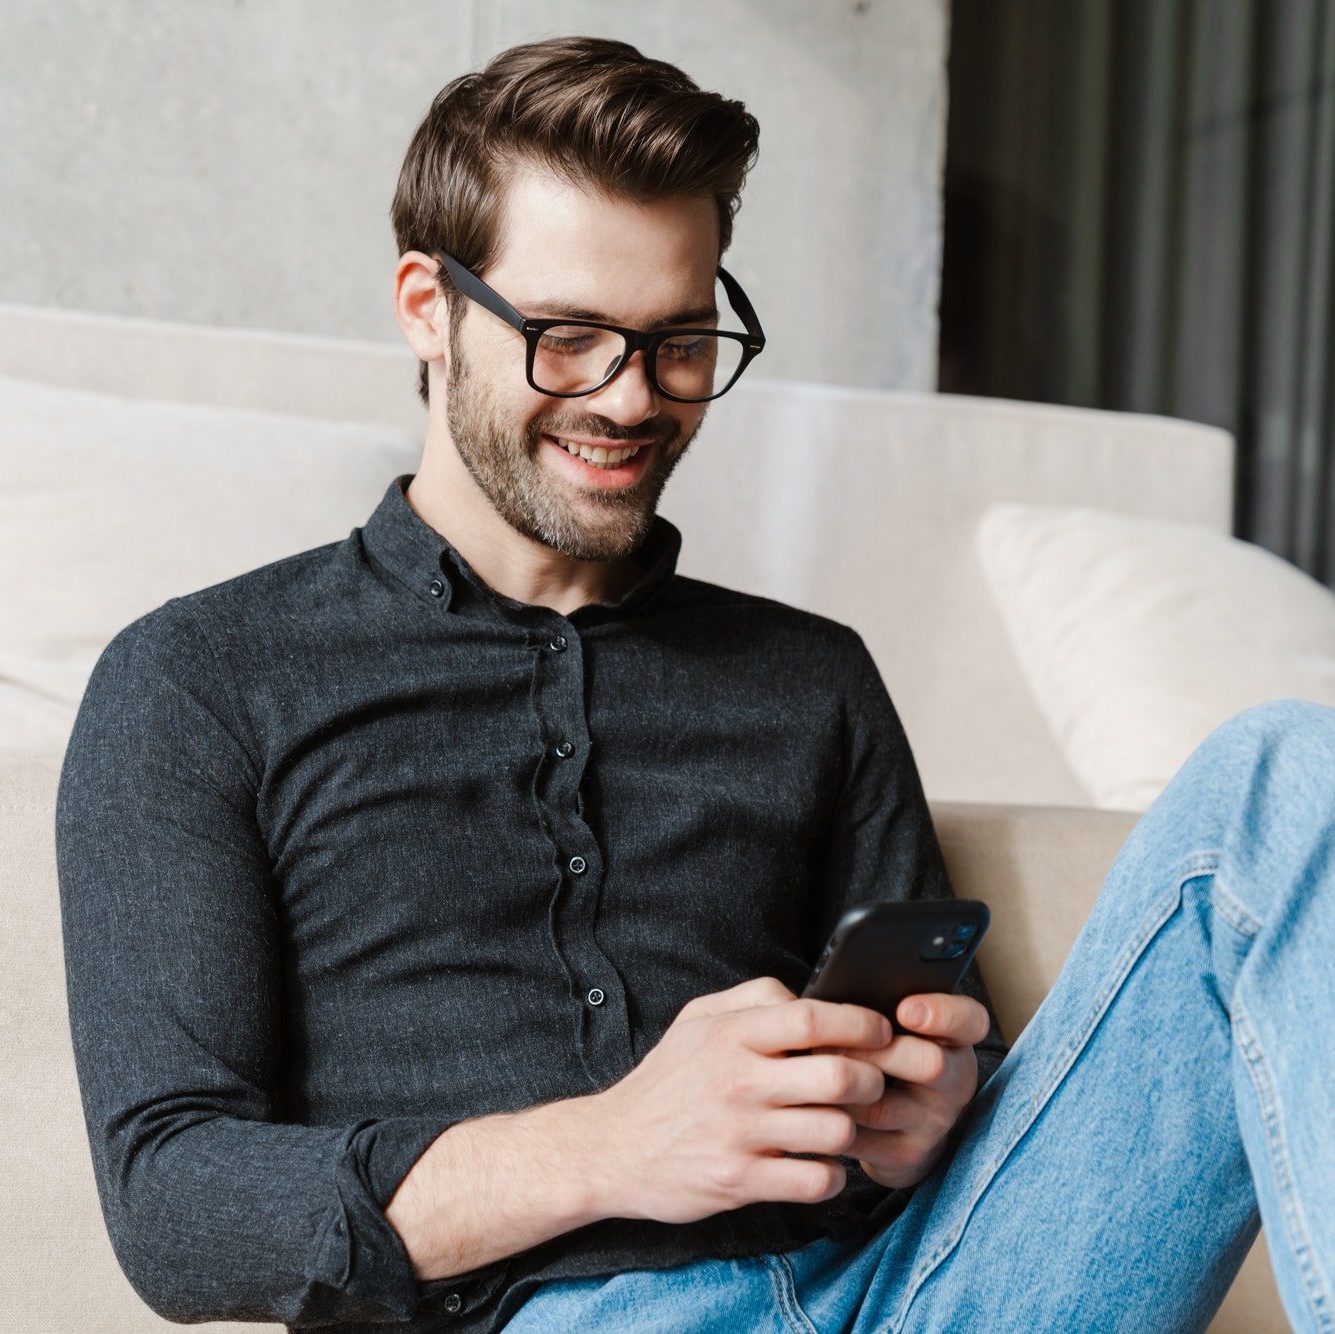 Cheerful unshaven man using smartphone while sitting on floor